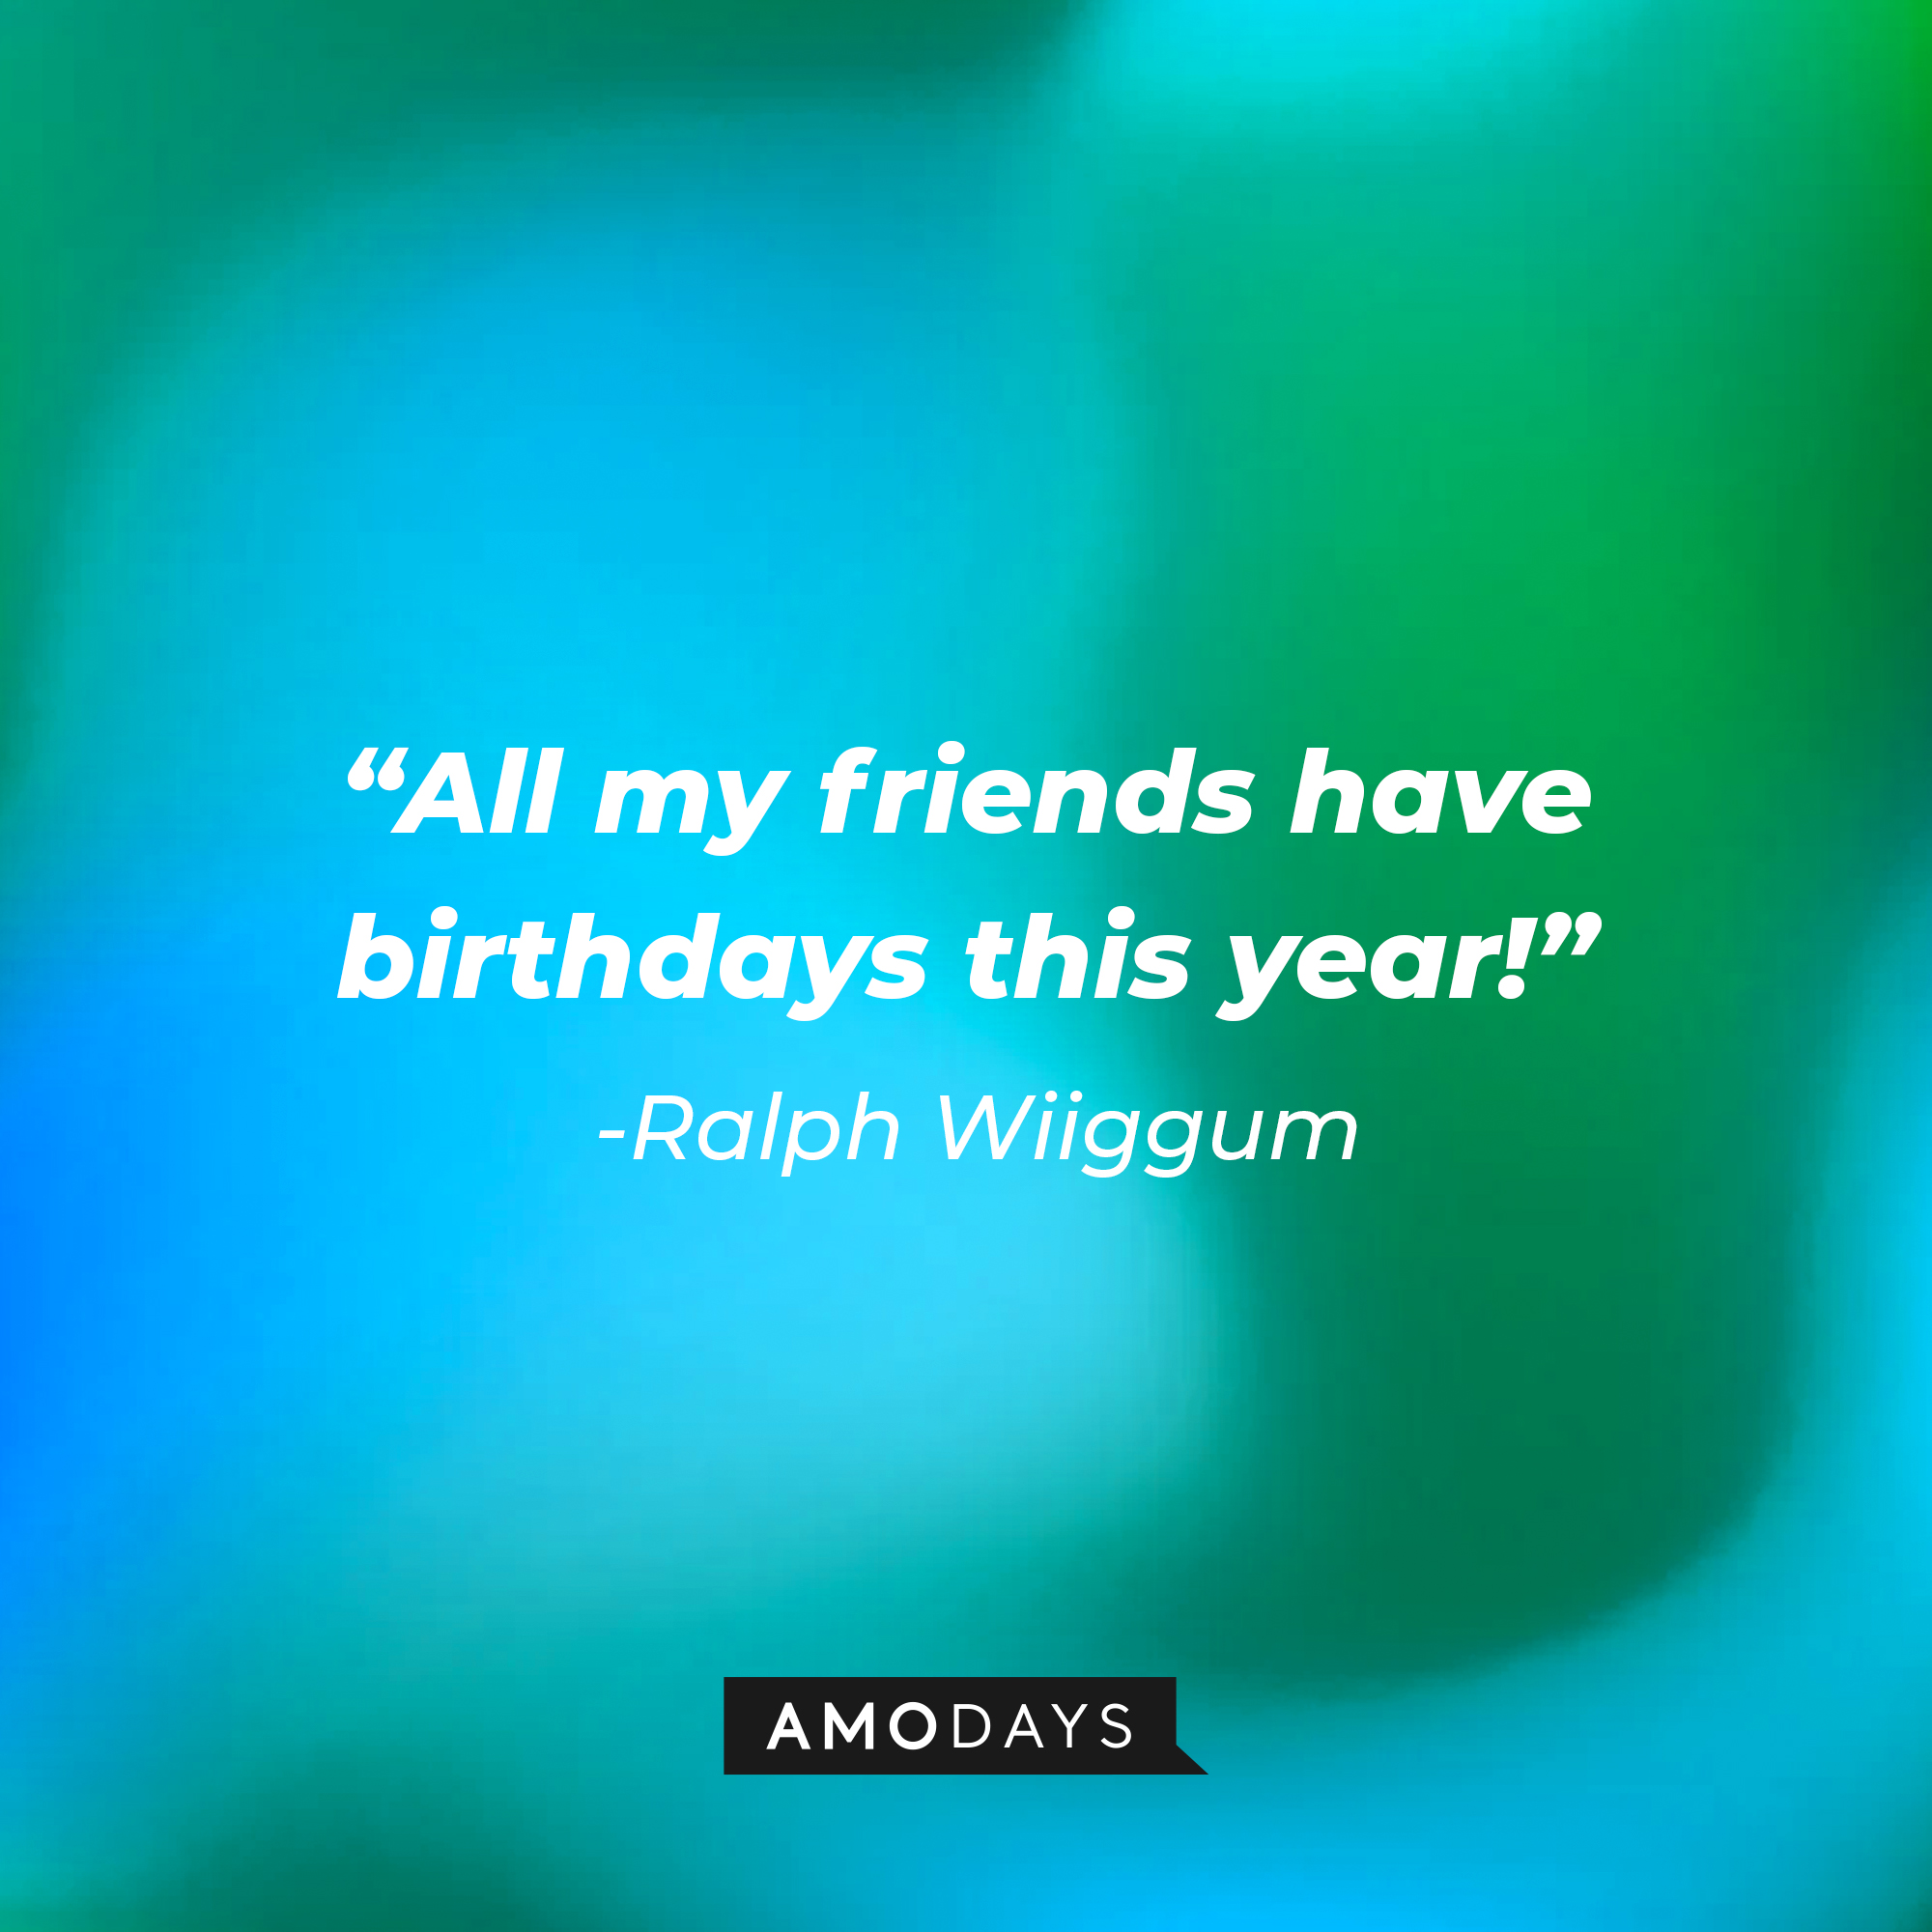 Ralph Wiiggum’s quote: “All my friends have birthdays this year!”  | Source: AmoDays